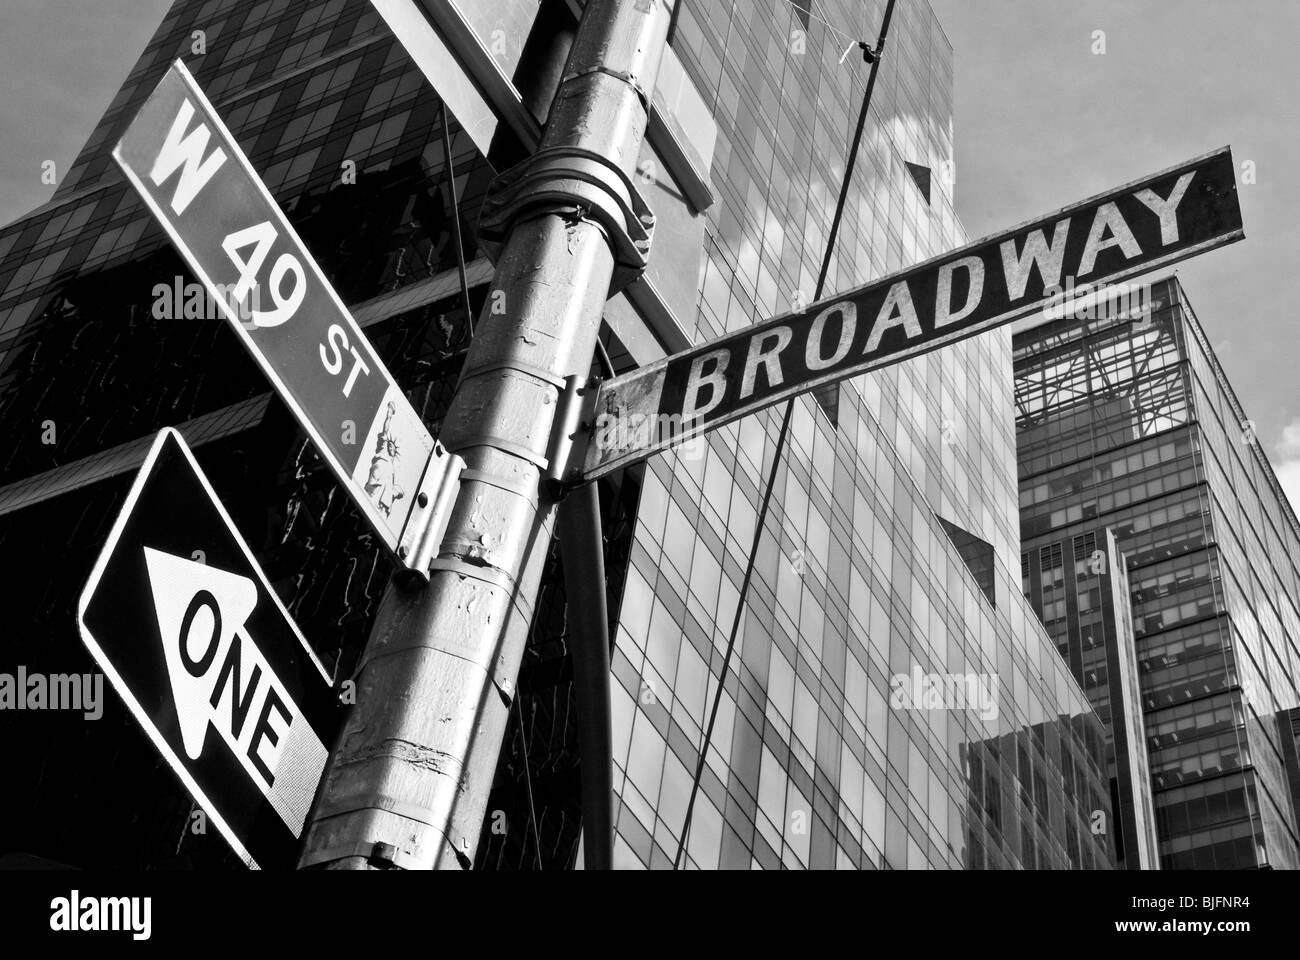 Black and white study of Broadway and W49th St Signpost in New York City - September 2009 Stock Photo